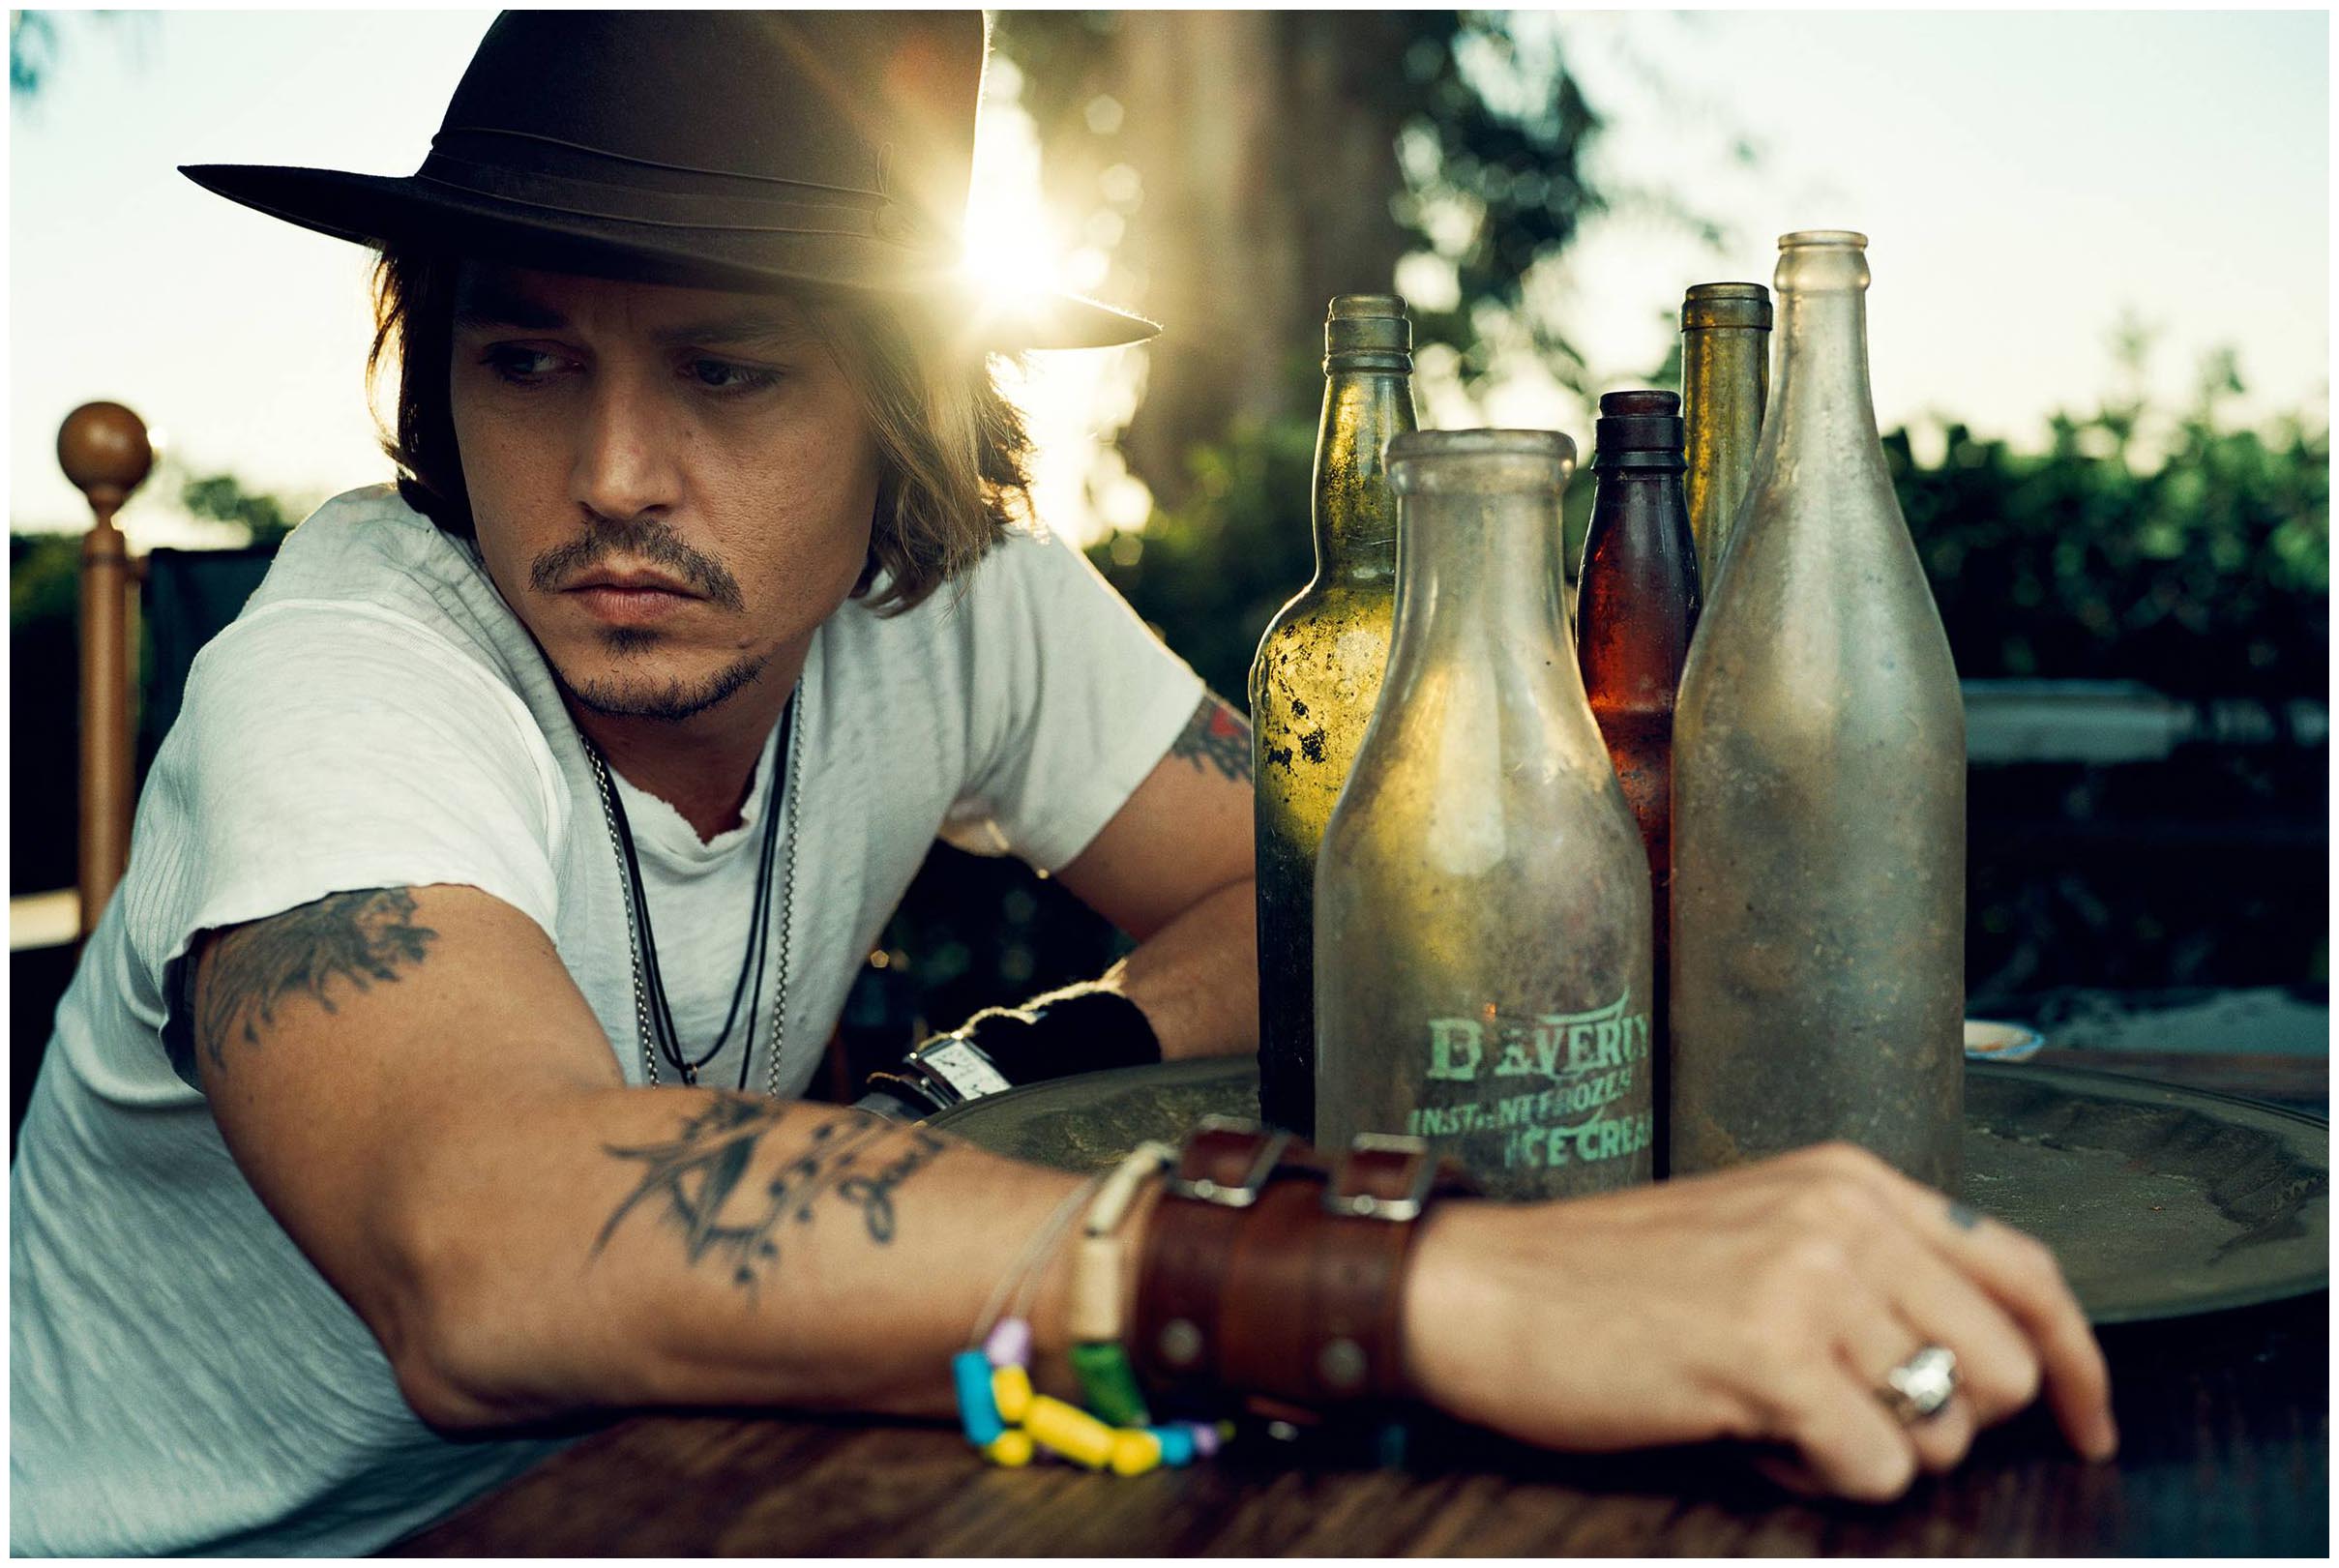 Johnny Depp Wallpapers High Resolution and Quality Download